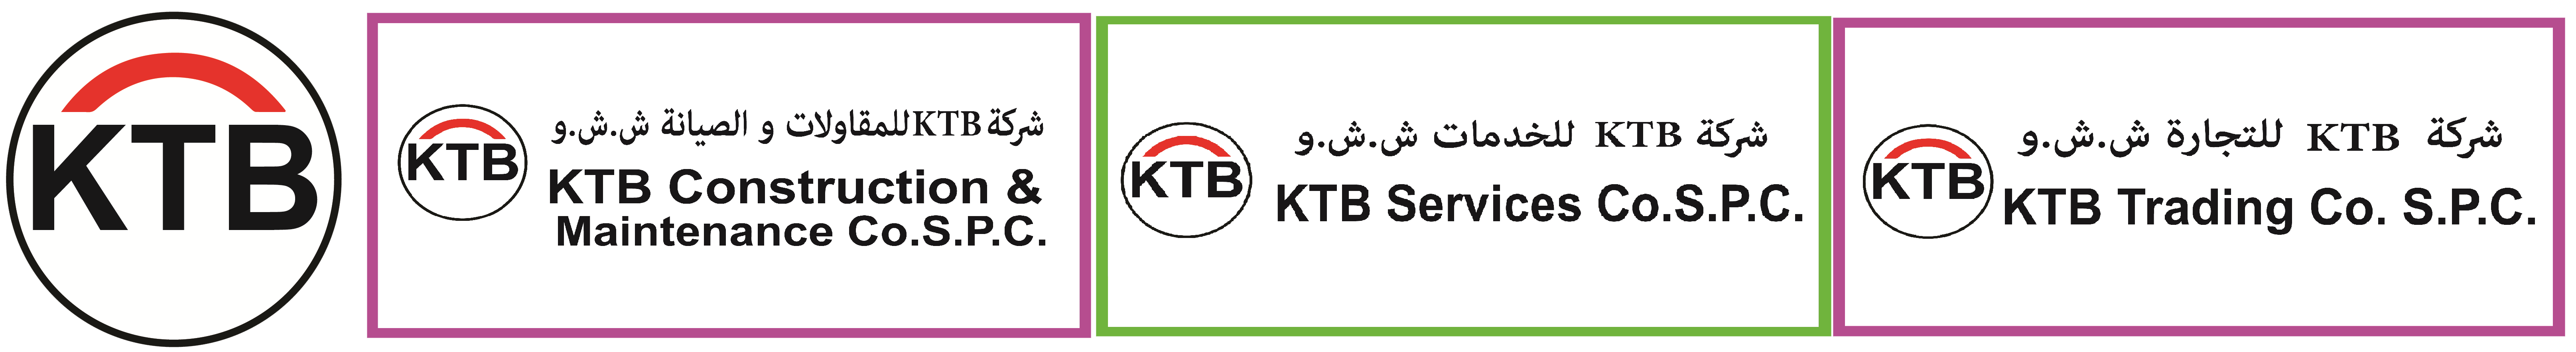 KTB Group - A Family Oriented business group based in Kingdom of Bahrain